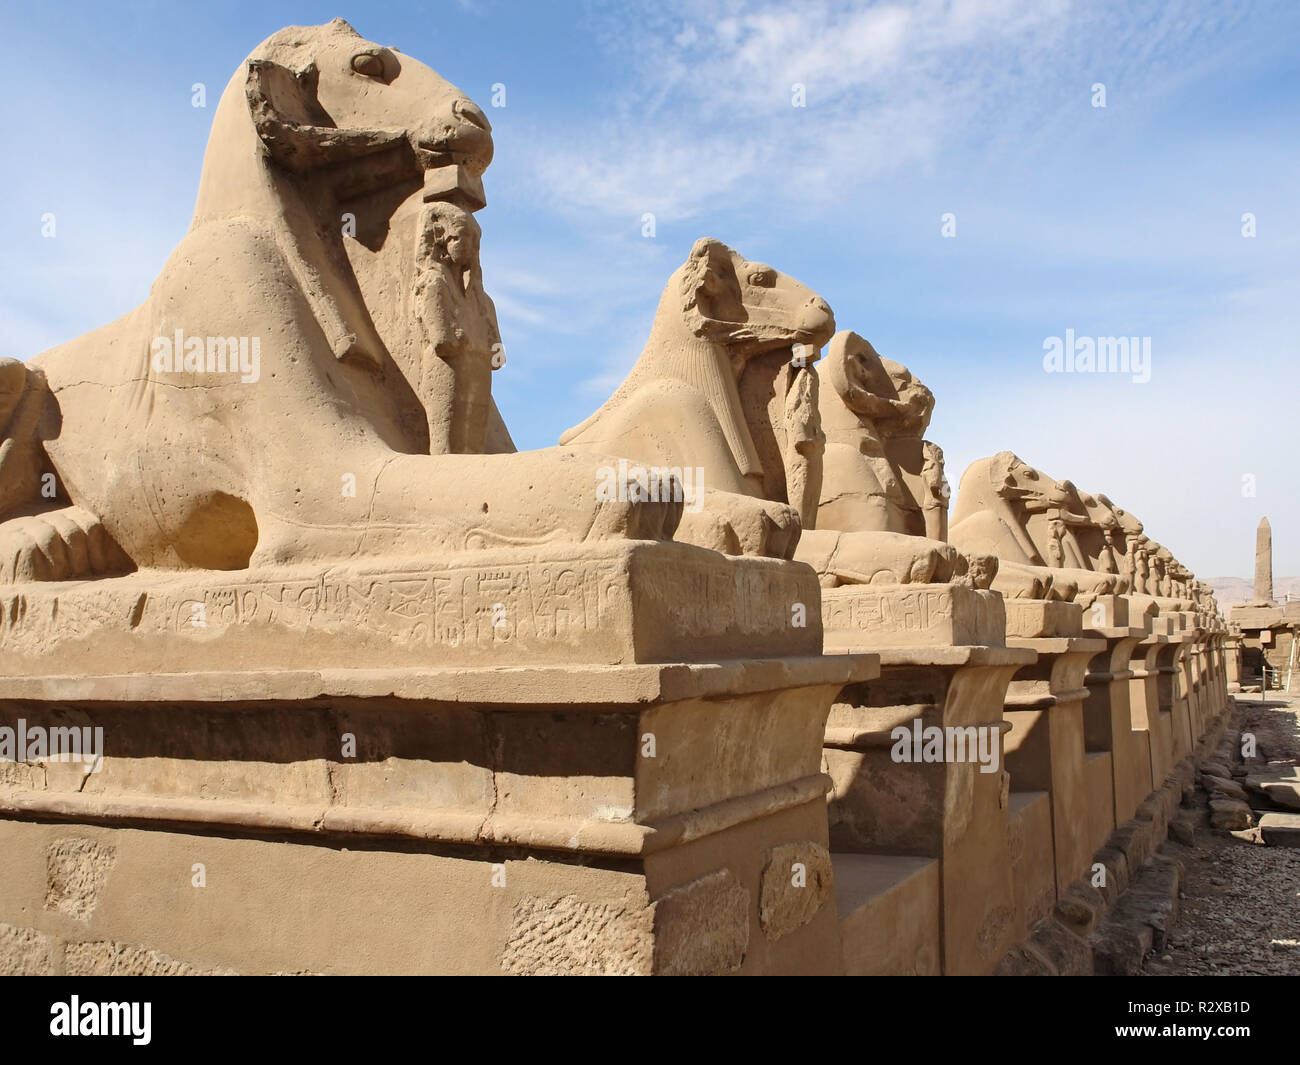 sculptures at the precinct of amun-re in egypt Stock Photo